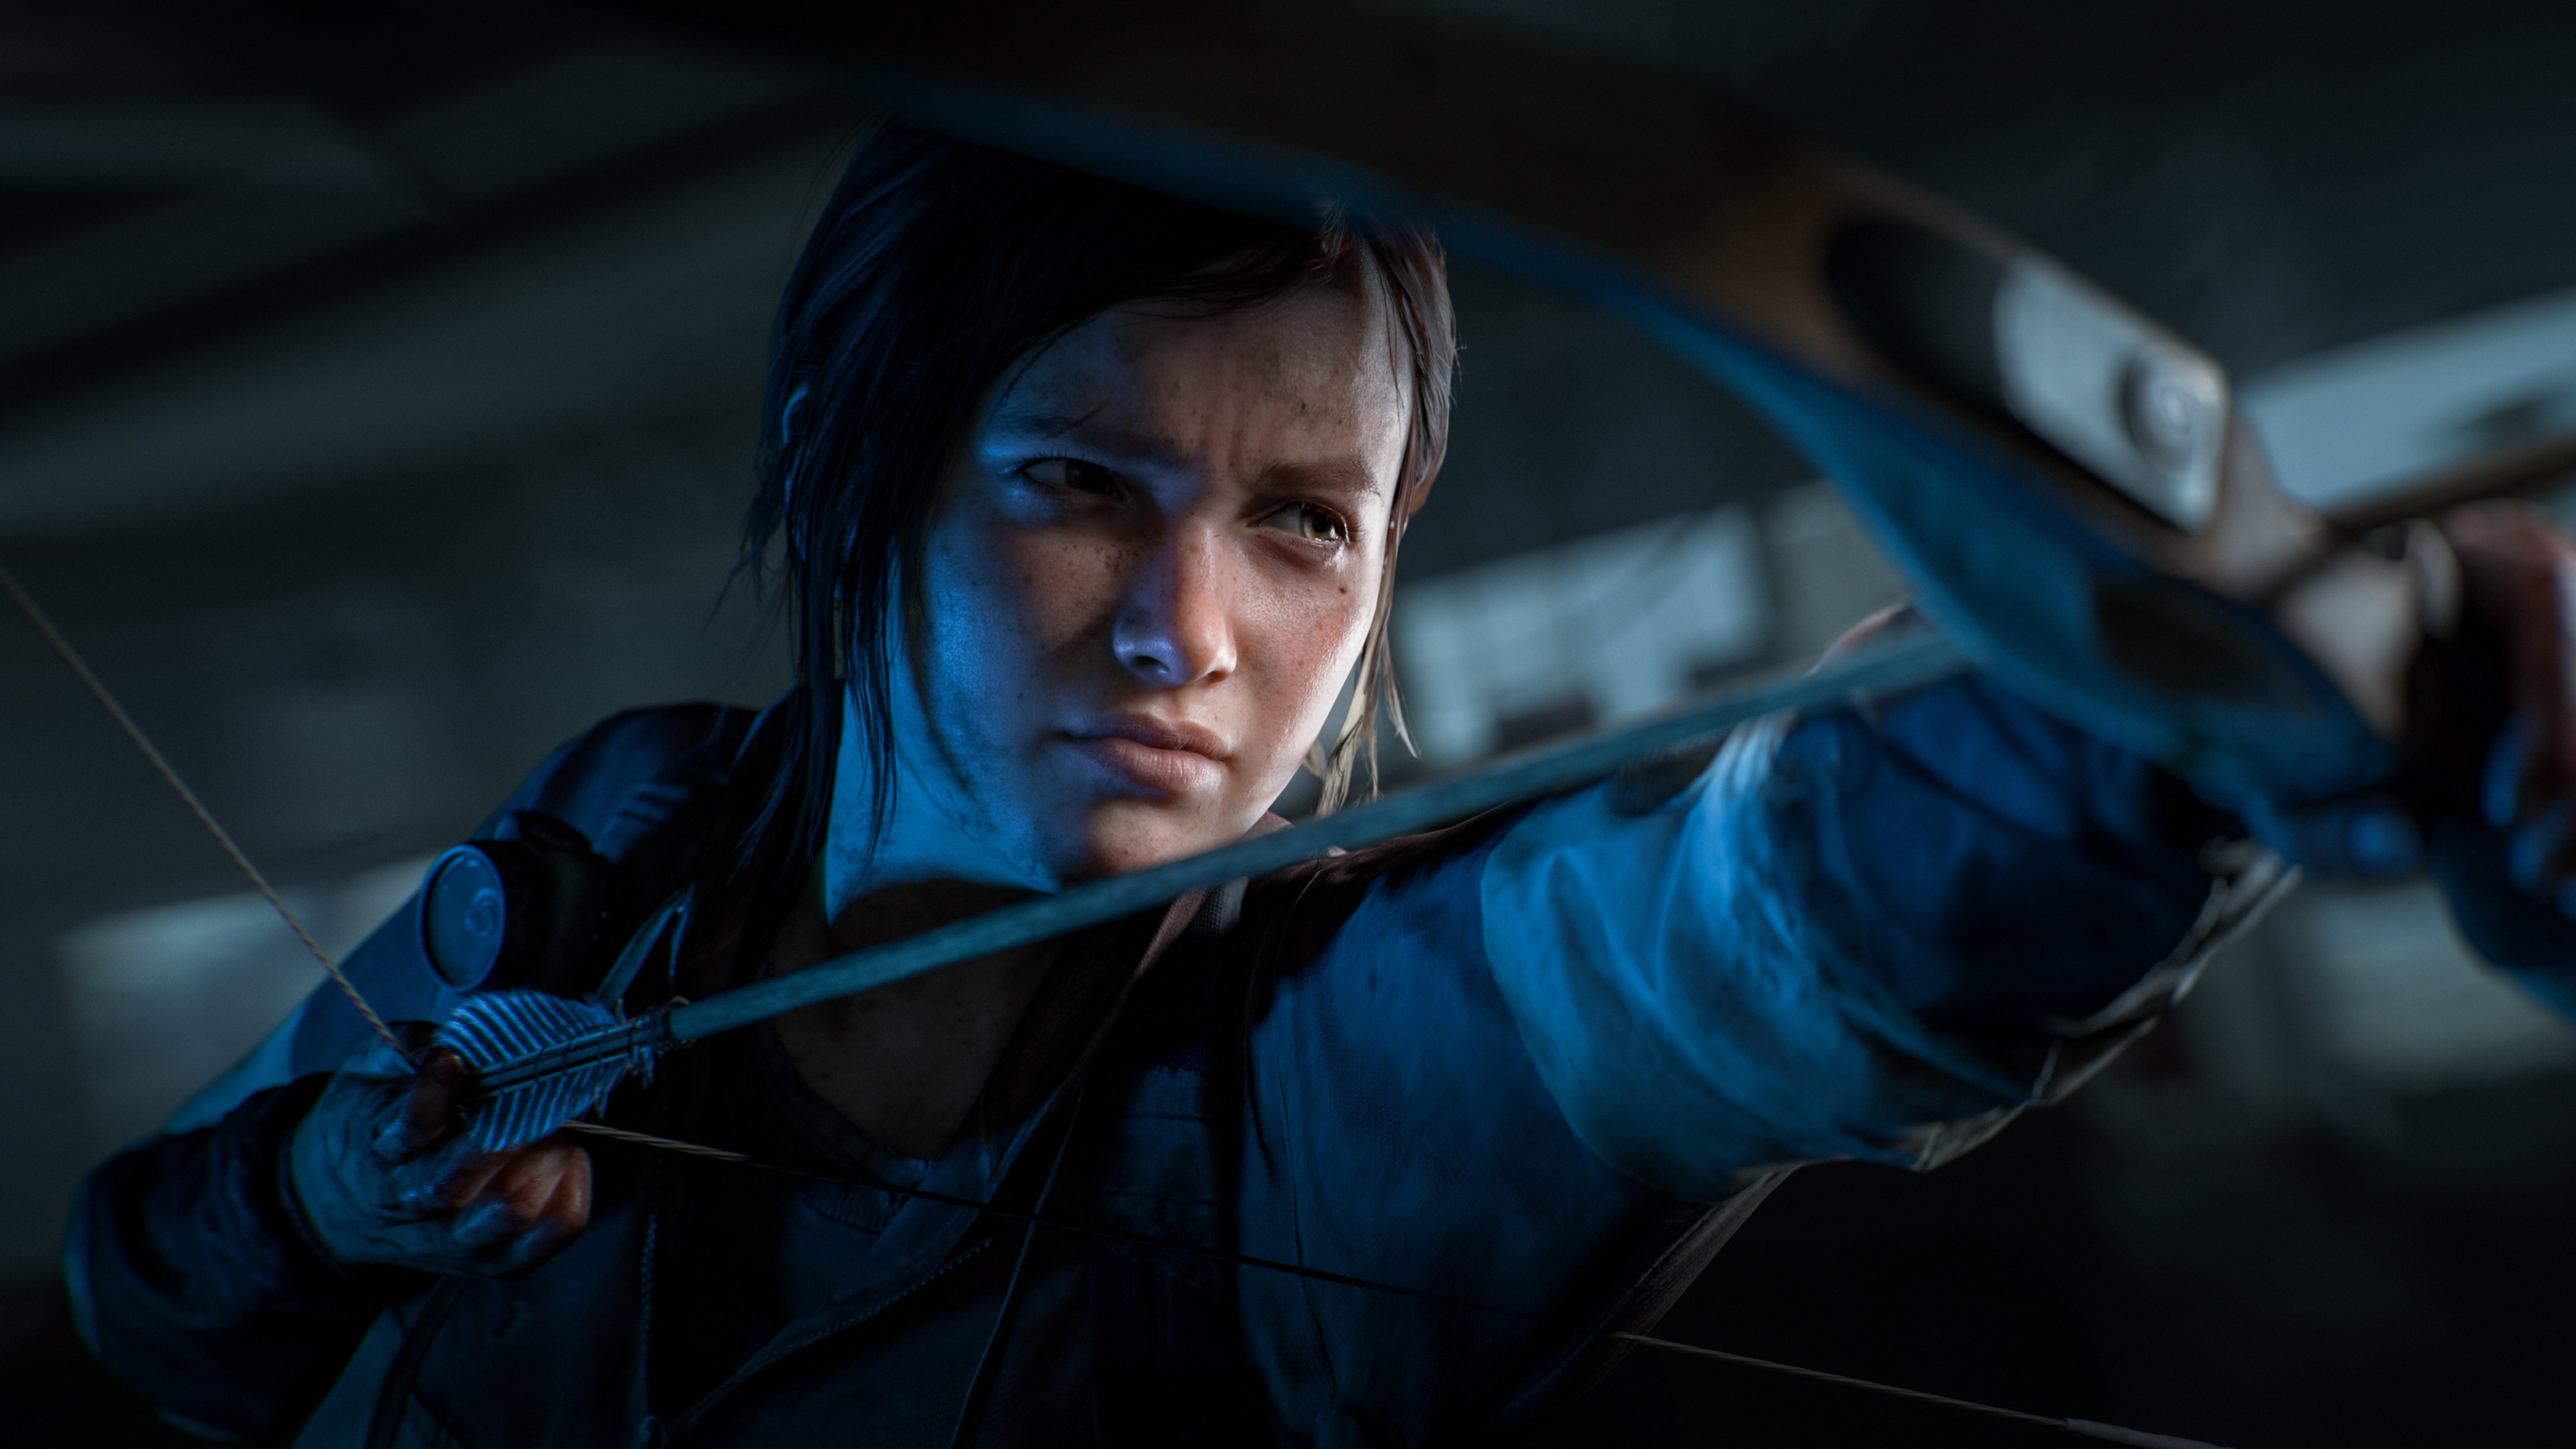 Wallpaper : video games, The Last of Us 2, Ellie Williams, in game  1920x1080 - ThePrettyReckless - 1937913 - HD Wallpapers - WallHere